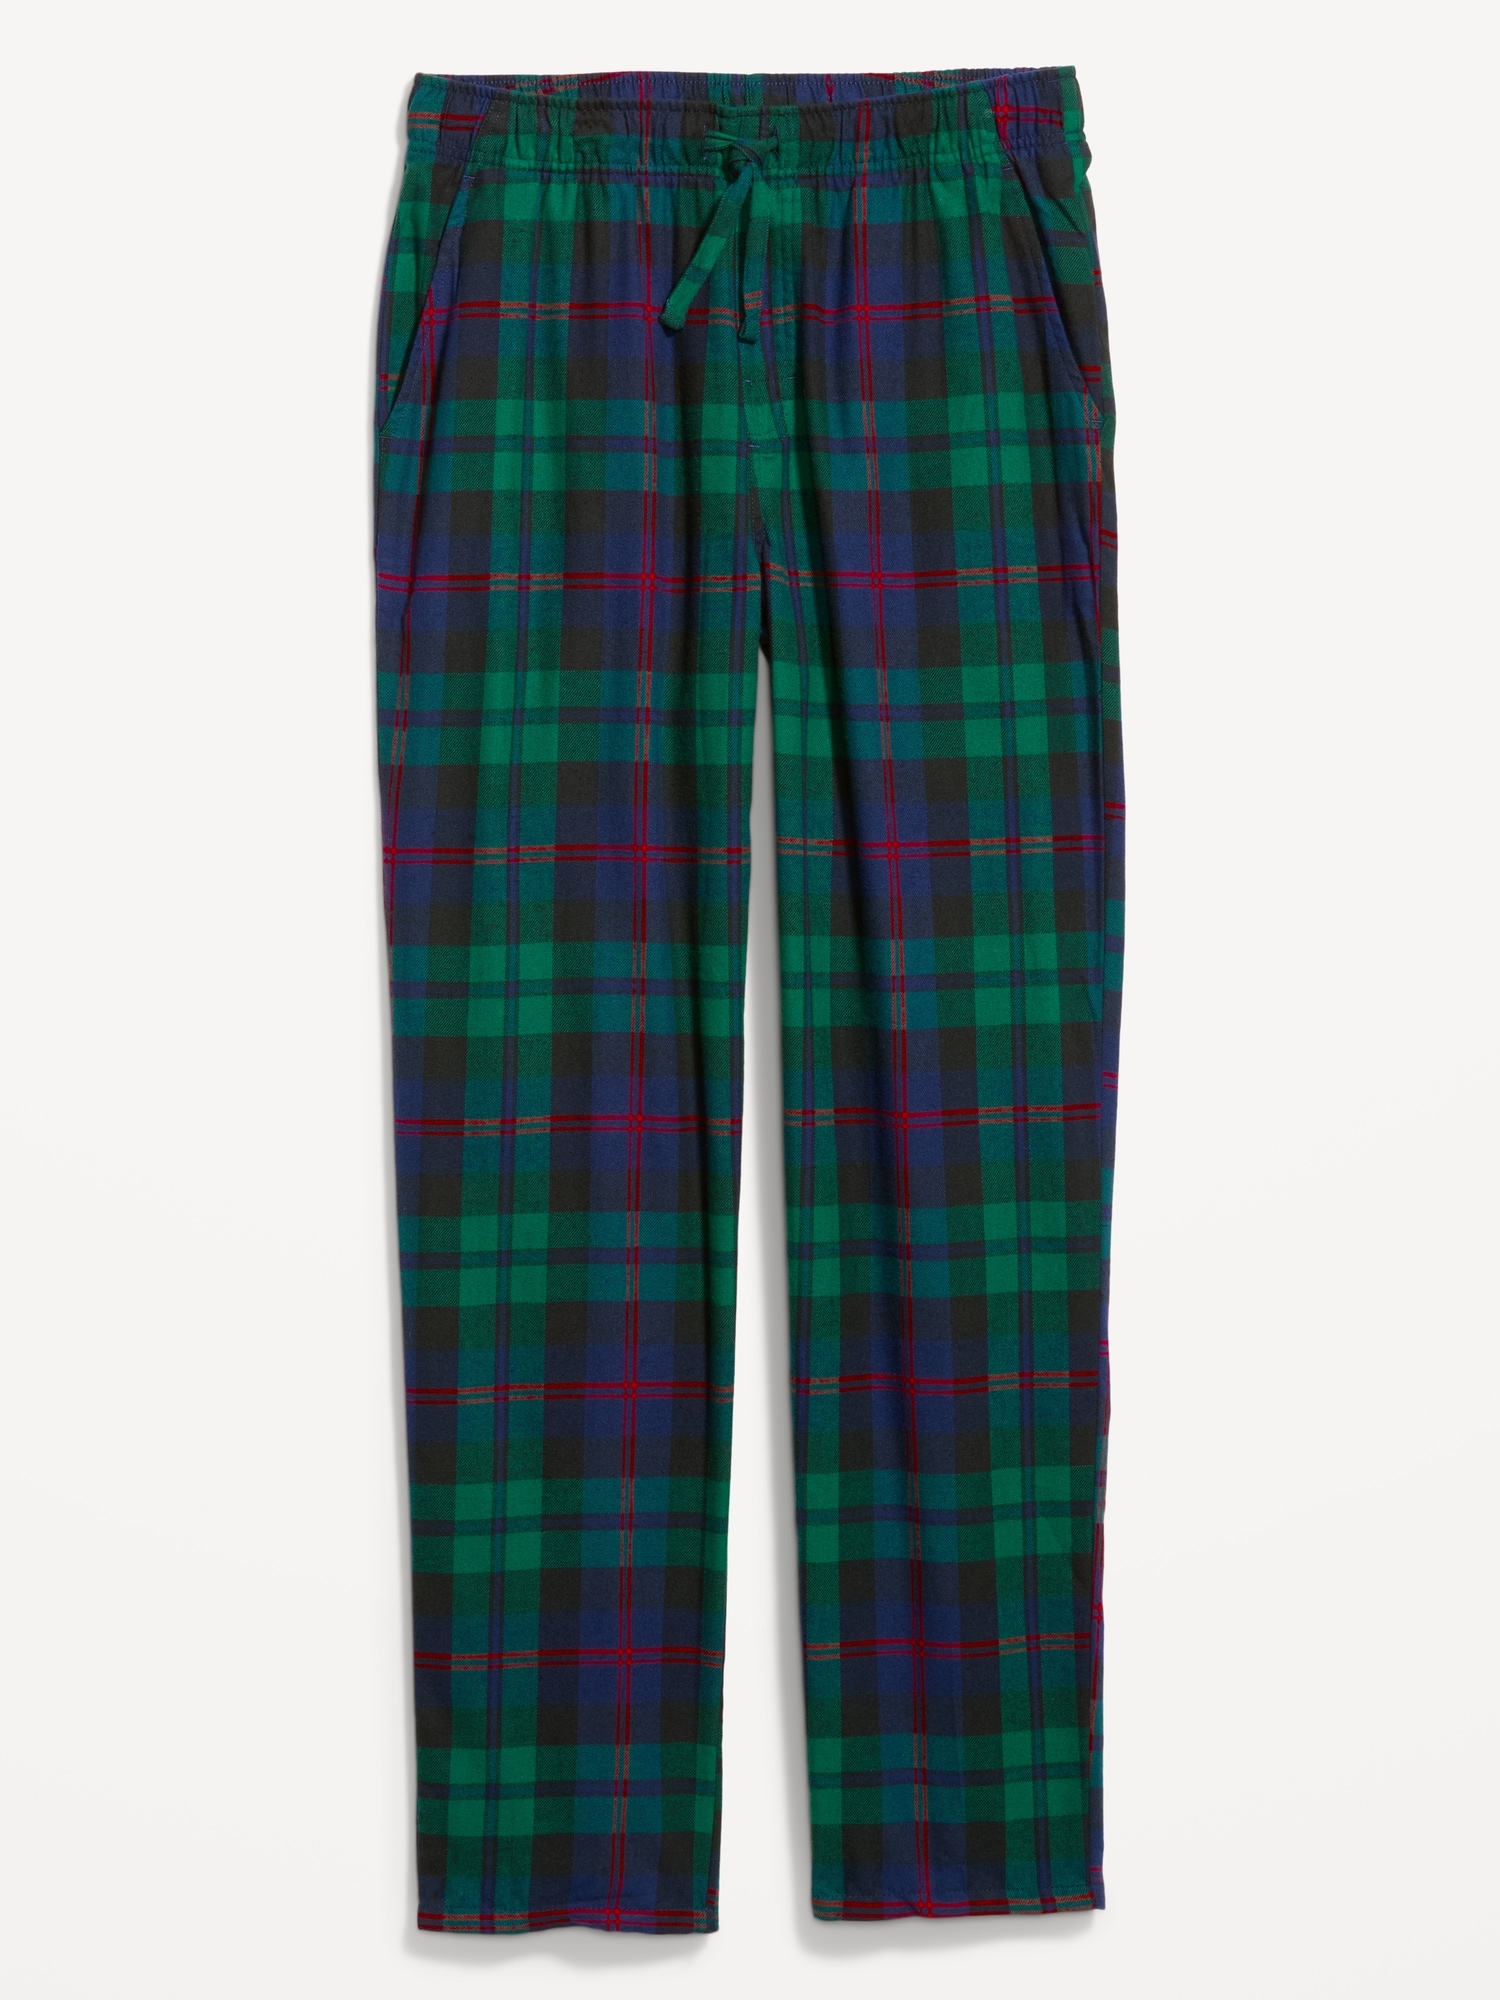 NWT: Men’s Old Navy Plaid Flannel Pajama Pants, Red/Black, Size XL